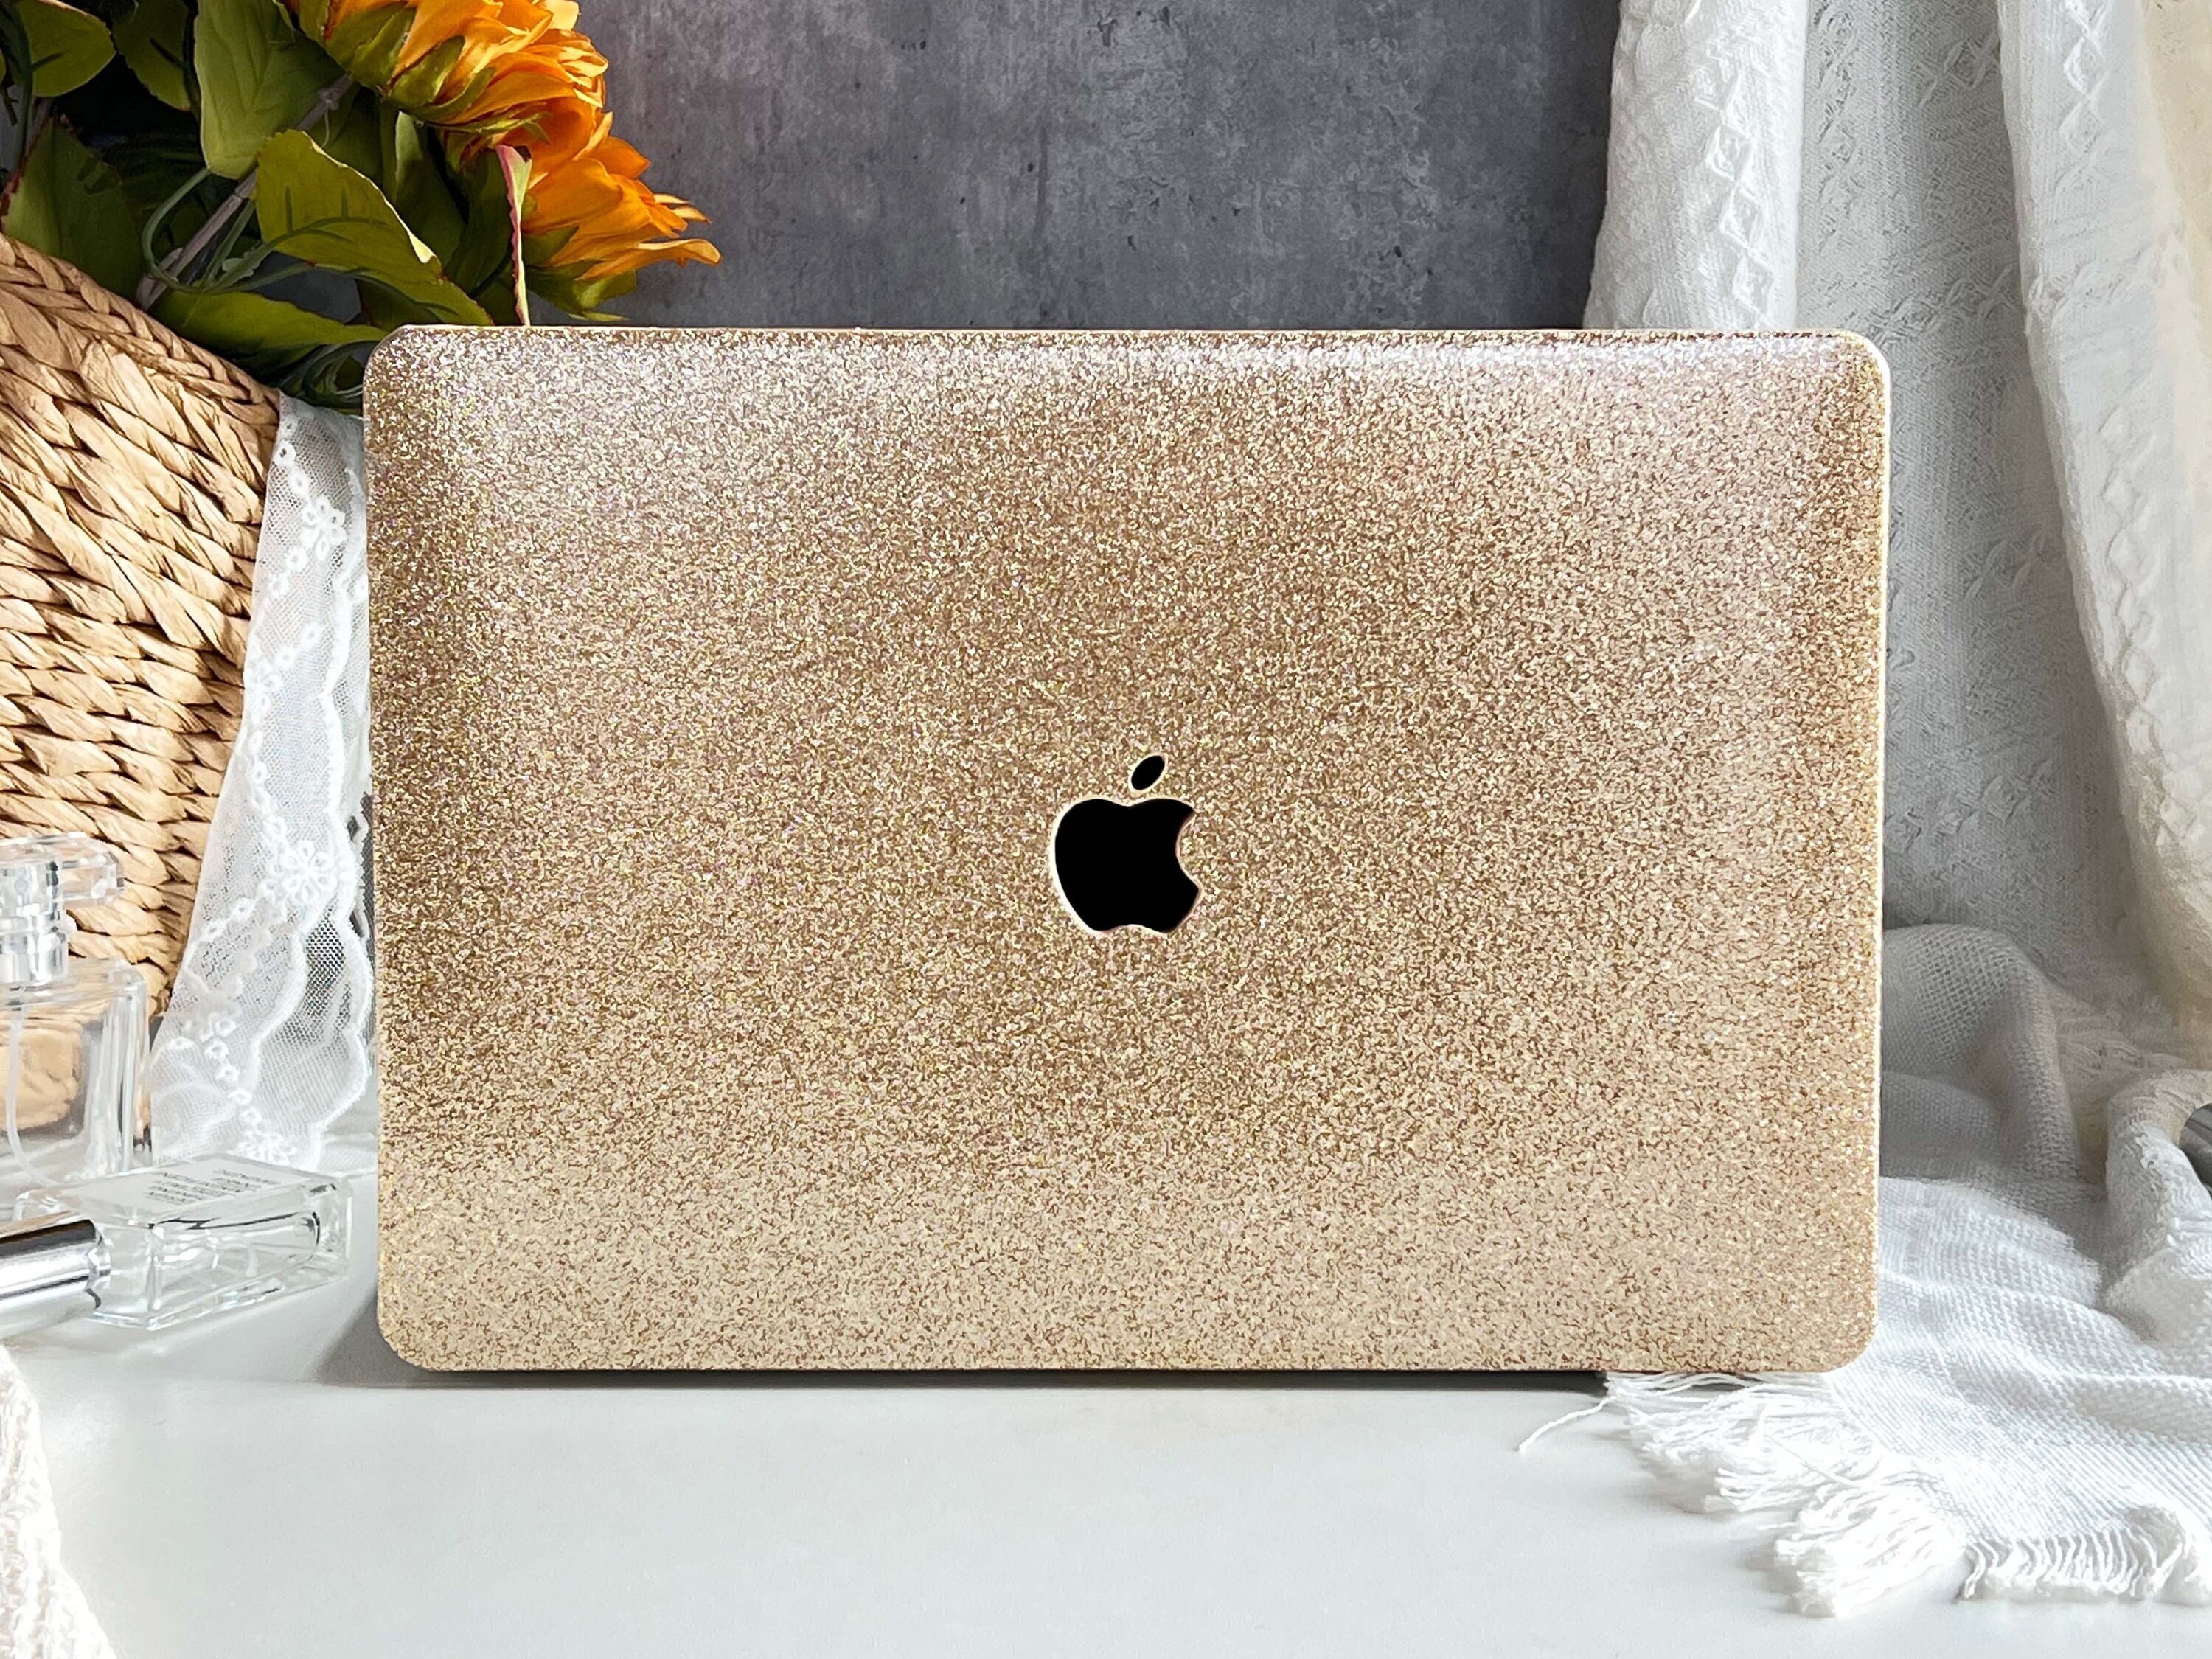 Glitter Rose Gold/ Silver Bling Shiny Case for MacBook Air Pro  13.3"+Retina